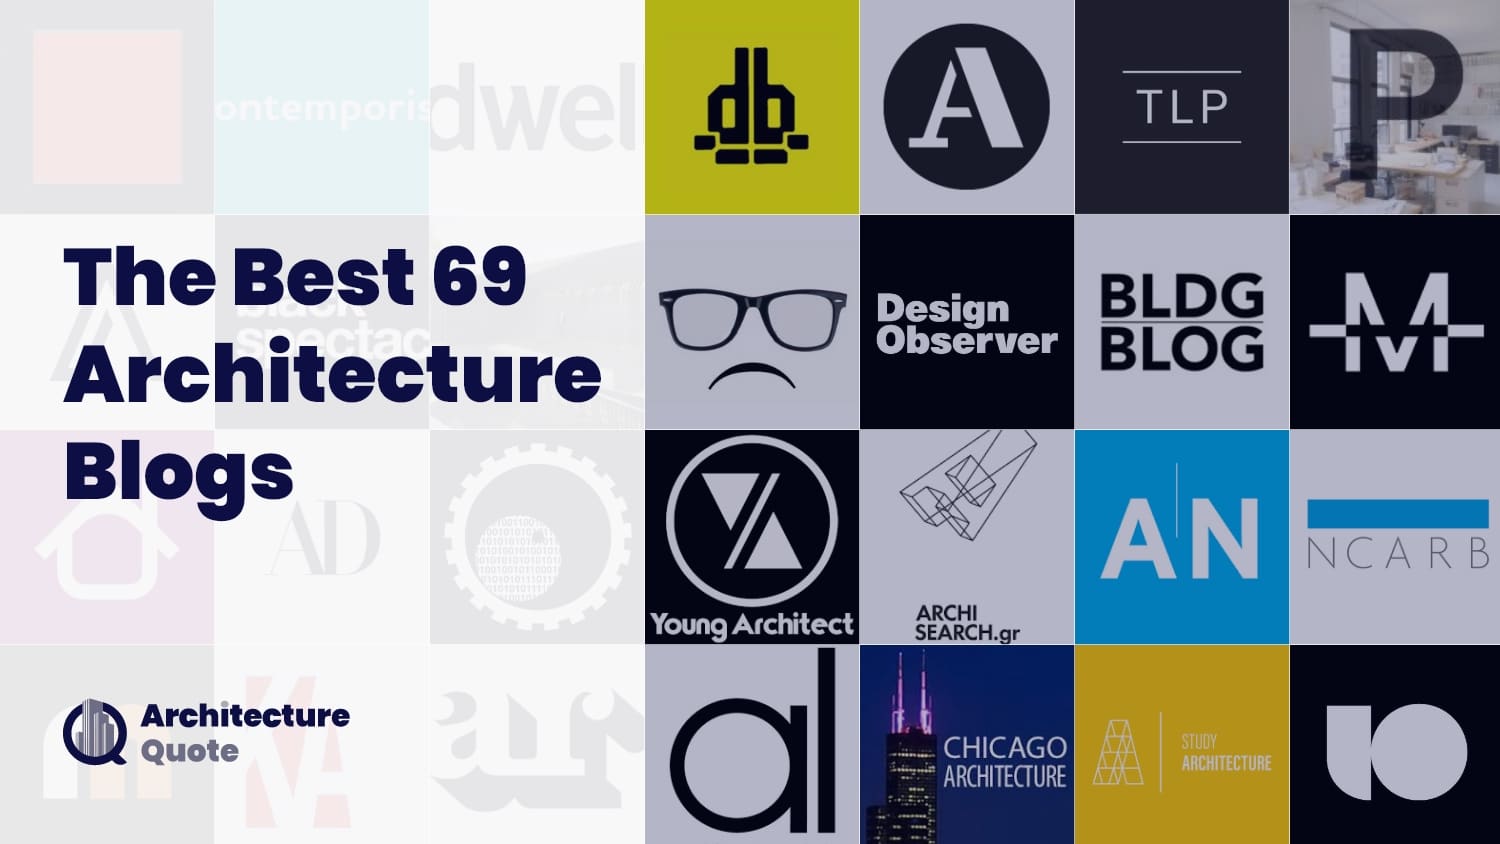 The Best 69 Architecture Blogs